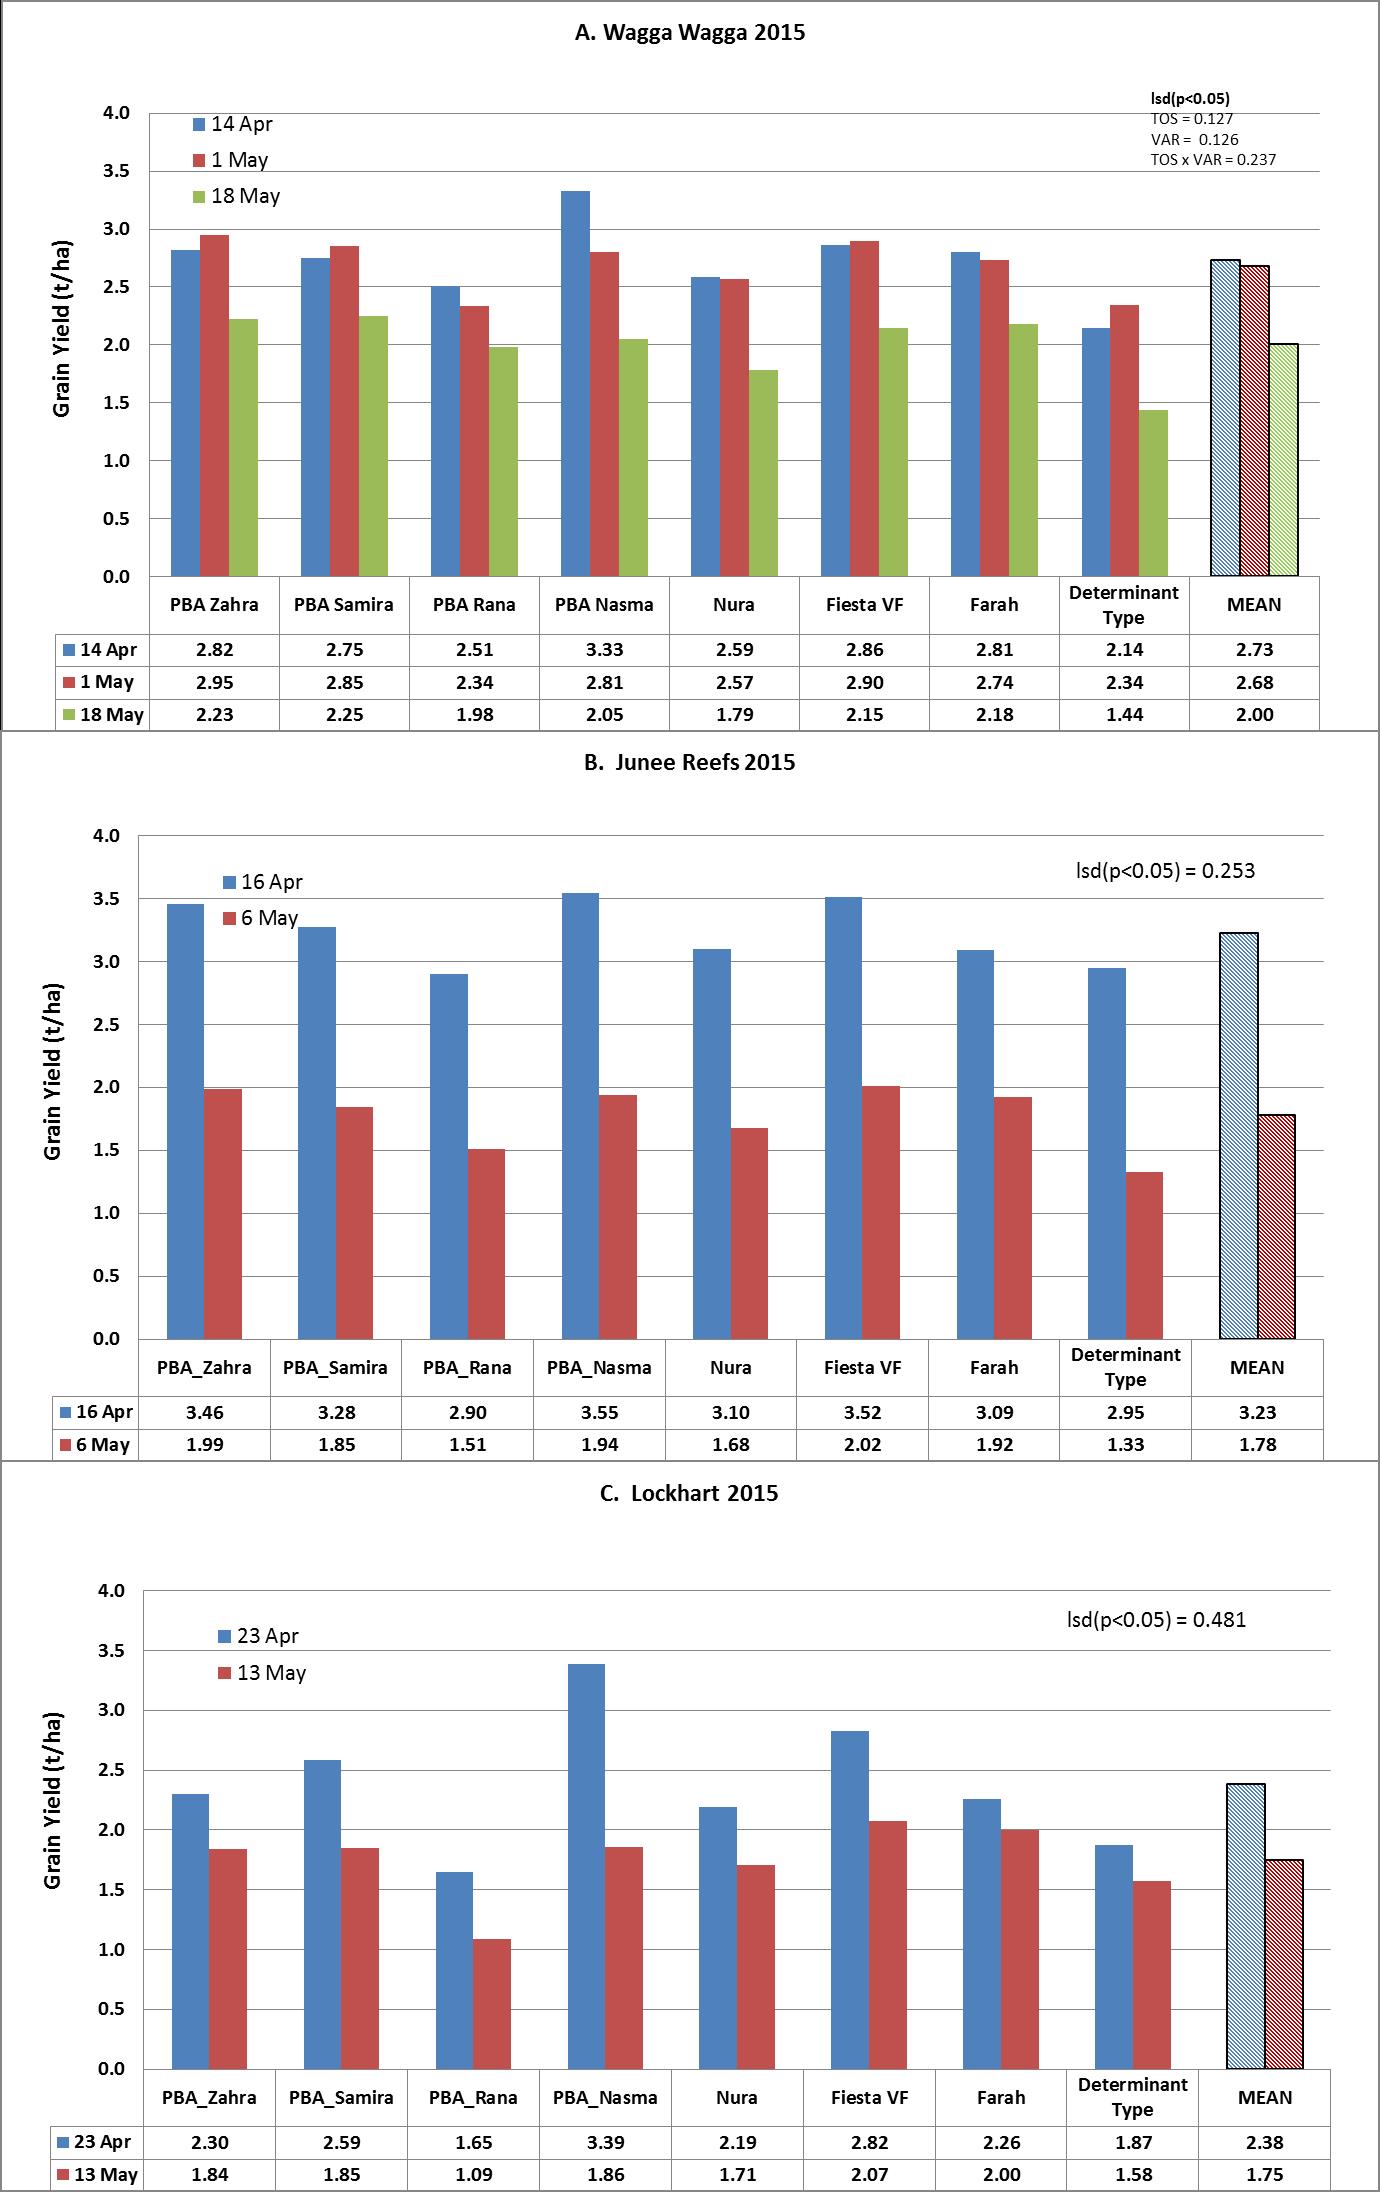 Figure 1: Grain yield of eight faba bean varieties over different sowing times at Wagga Wagga, Junee Reefs and Lockhart, 2015.